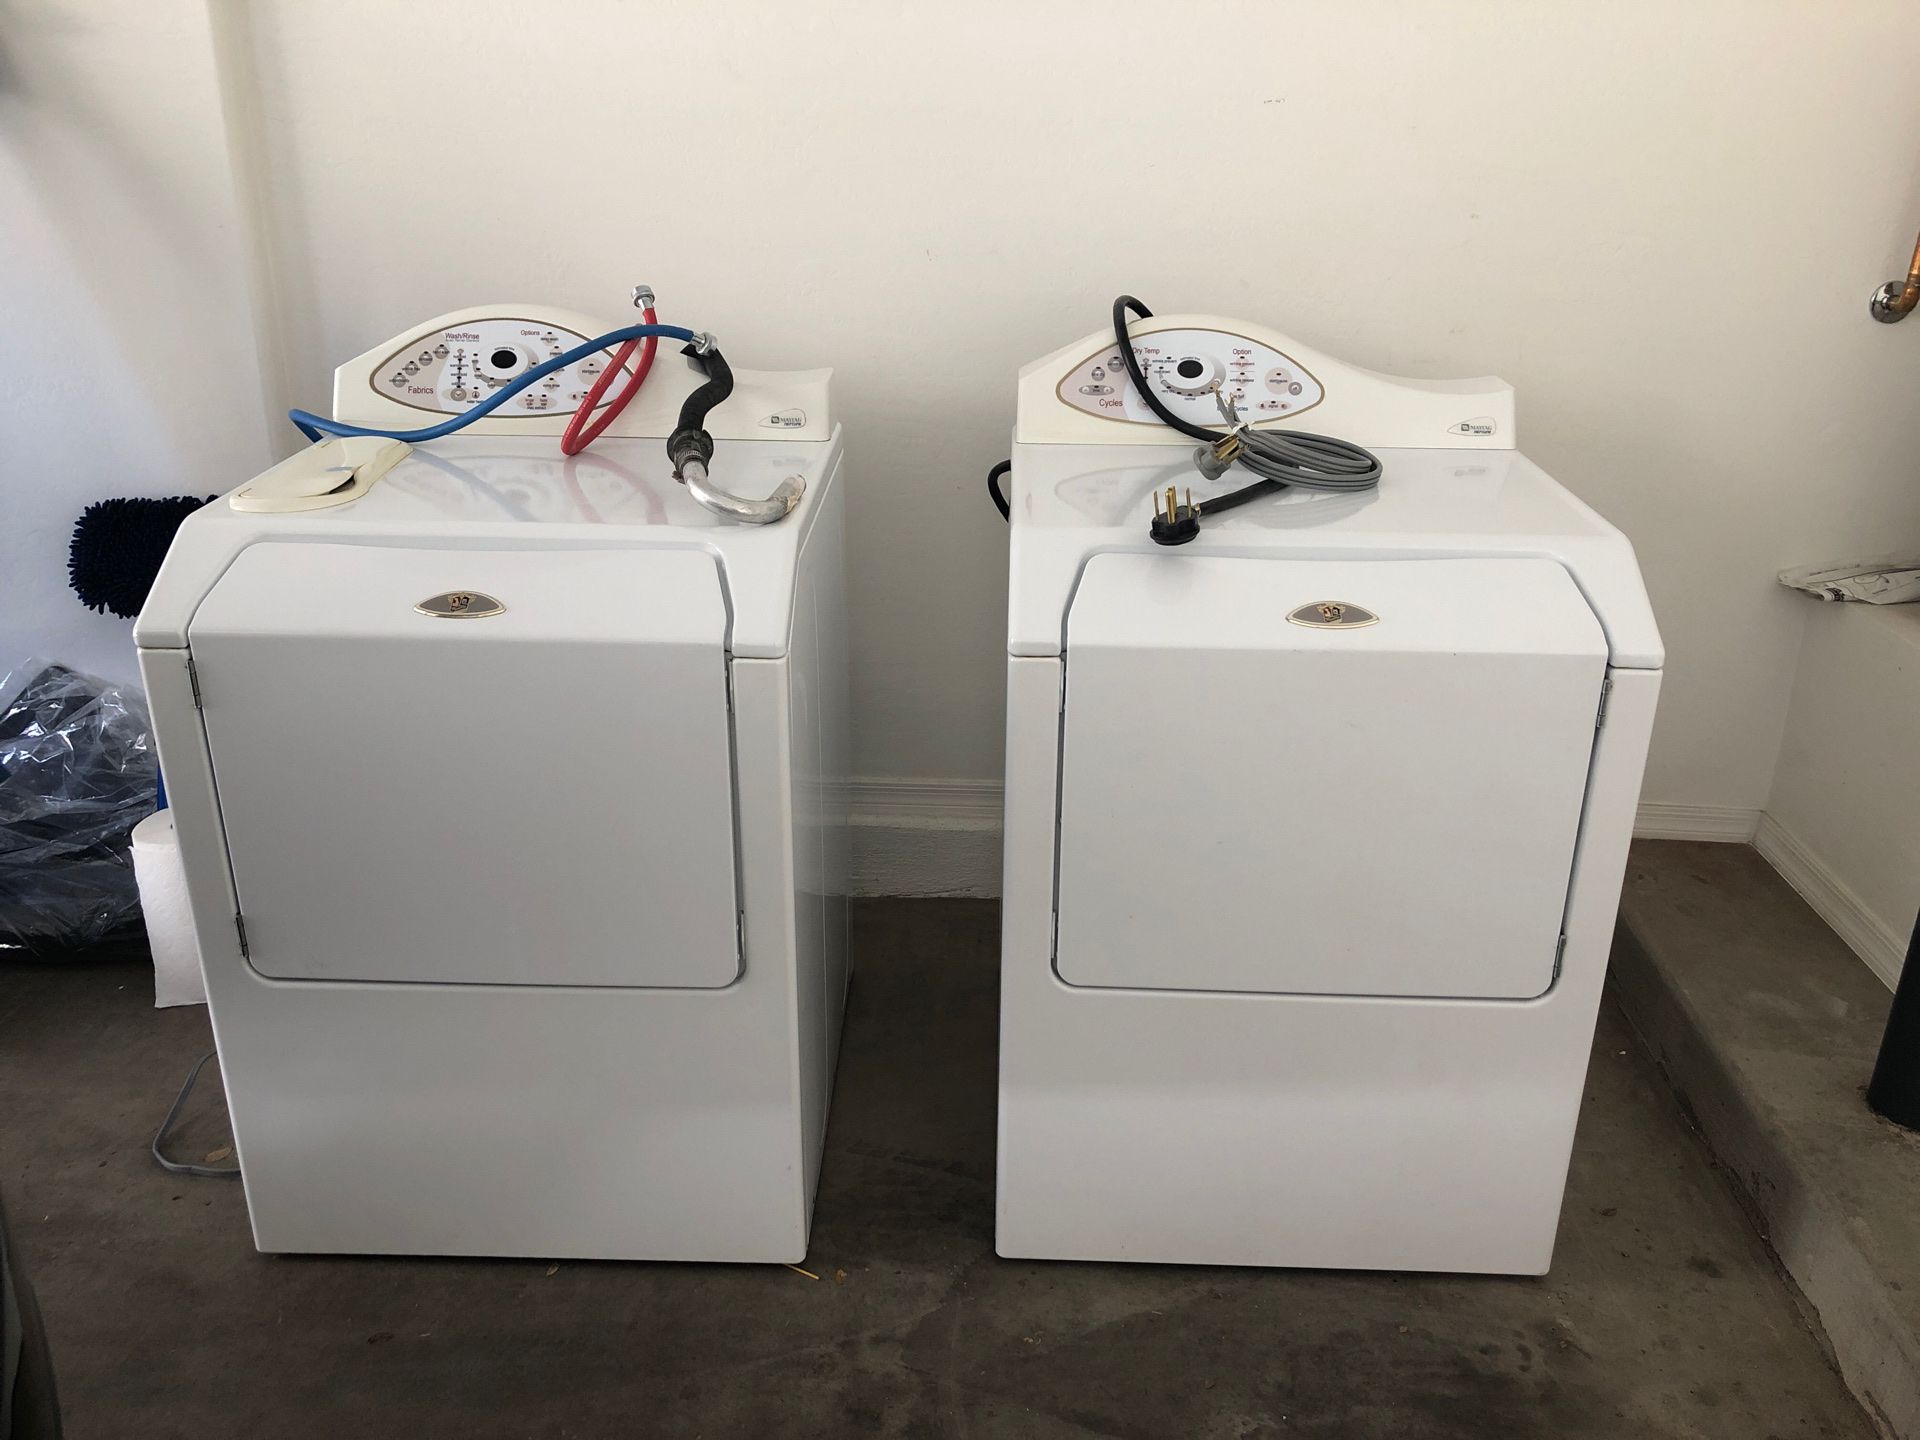 Maytag Neptune Washer and Electric Dryer